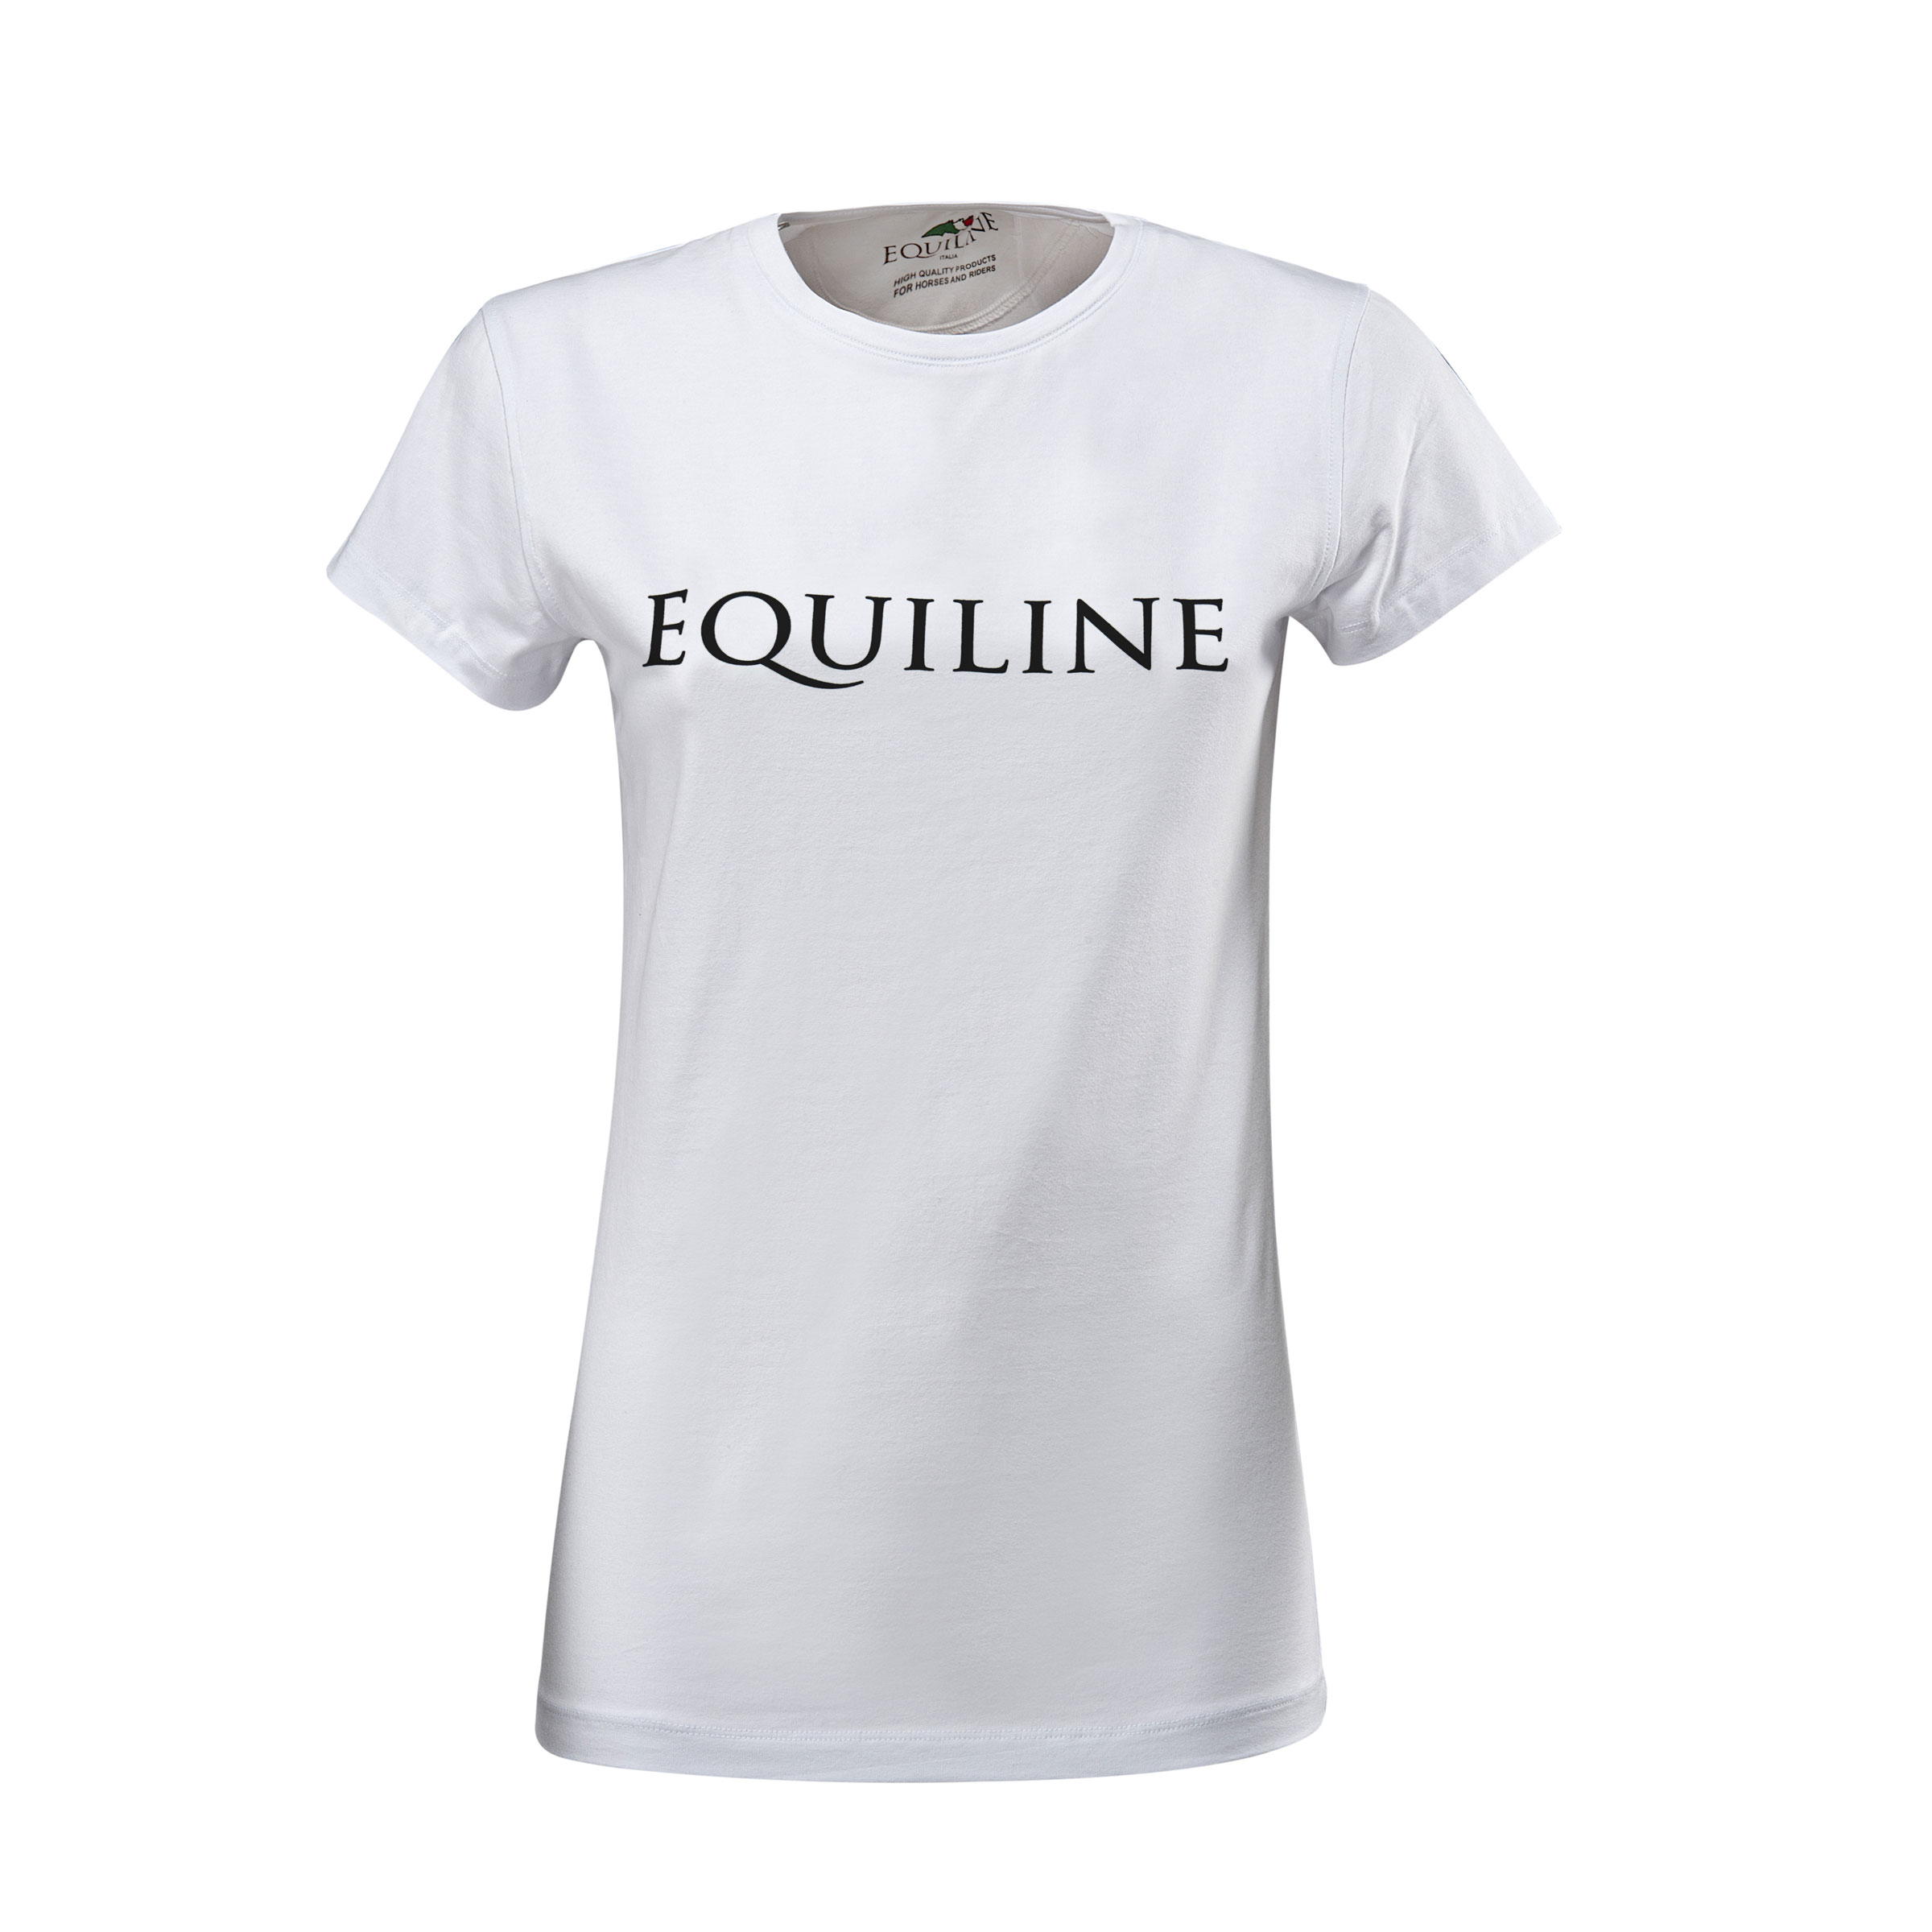    EQUILINE ()